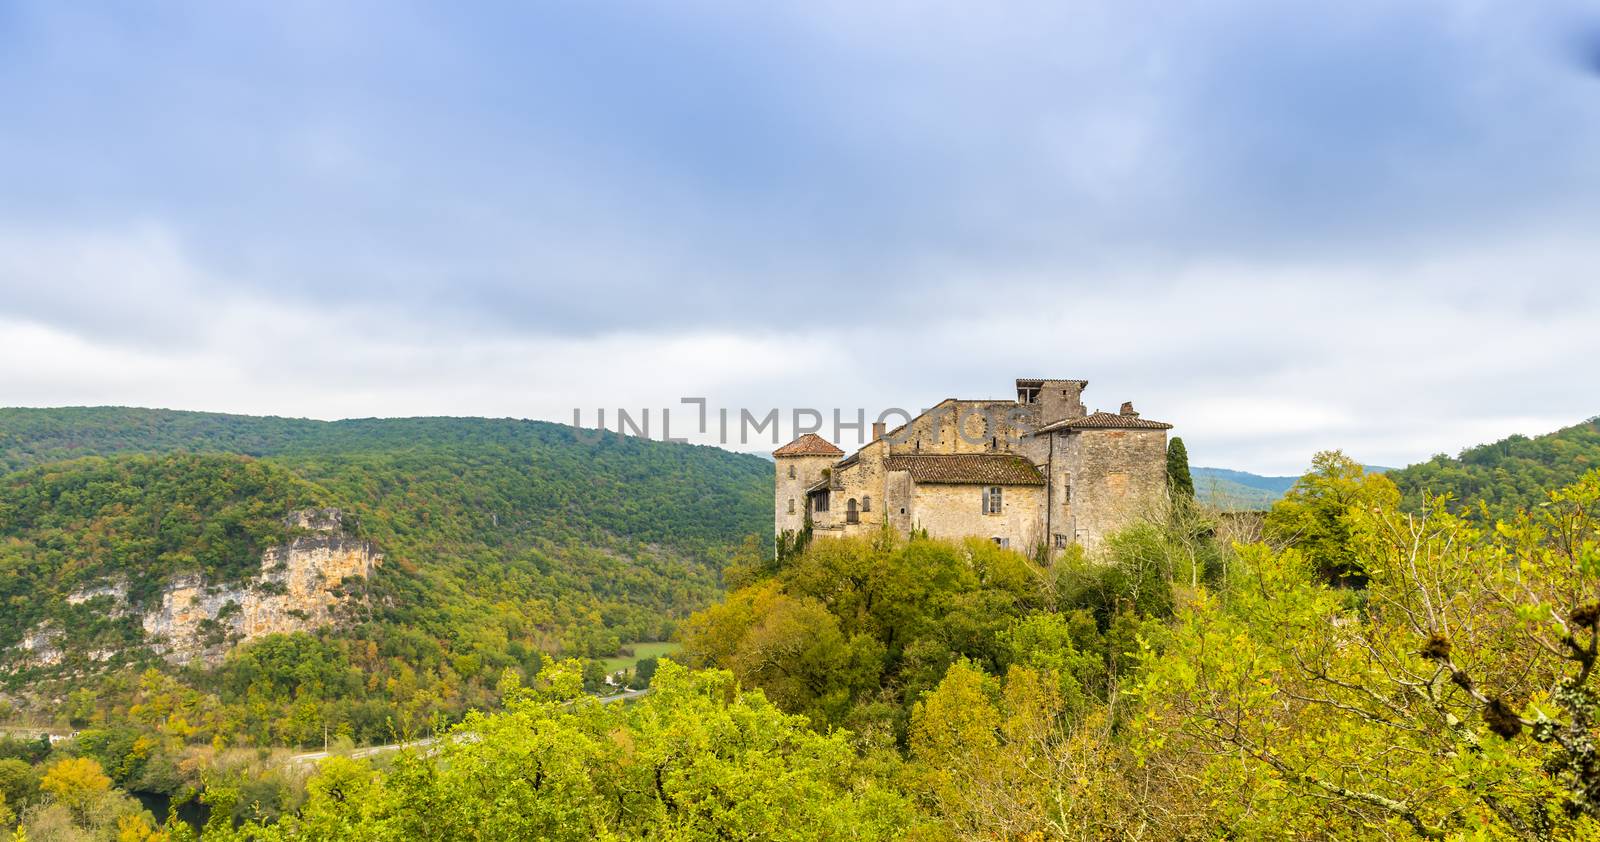 Magnificent medieval hilltop village in the department of Tarn-et-Garonne in the Occitanie region in the south of France is part of the list of the most beautiful French villages.